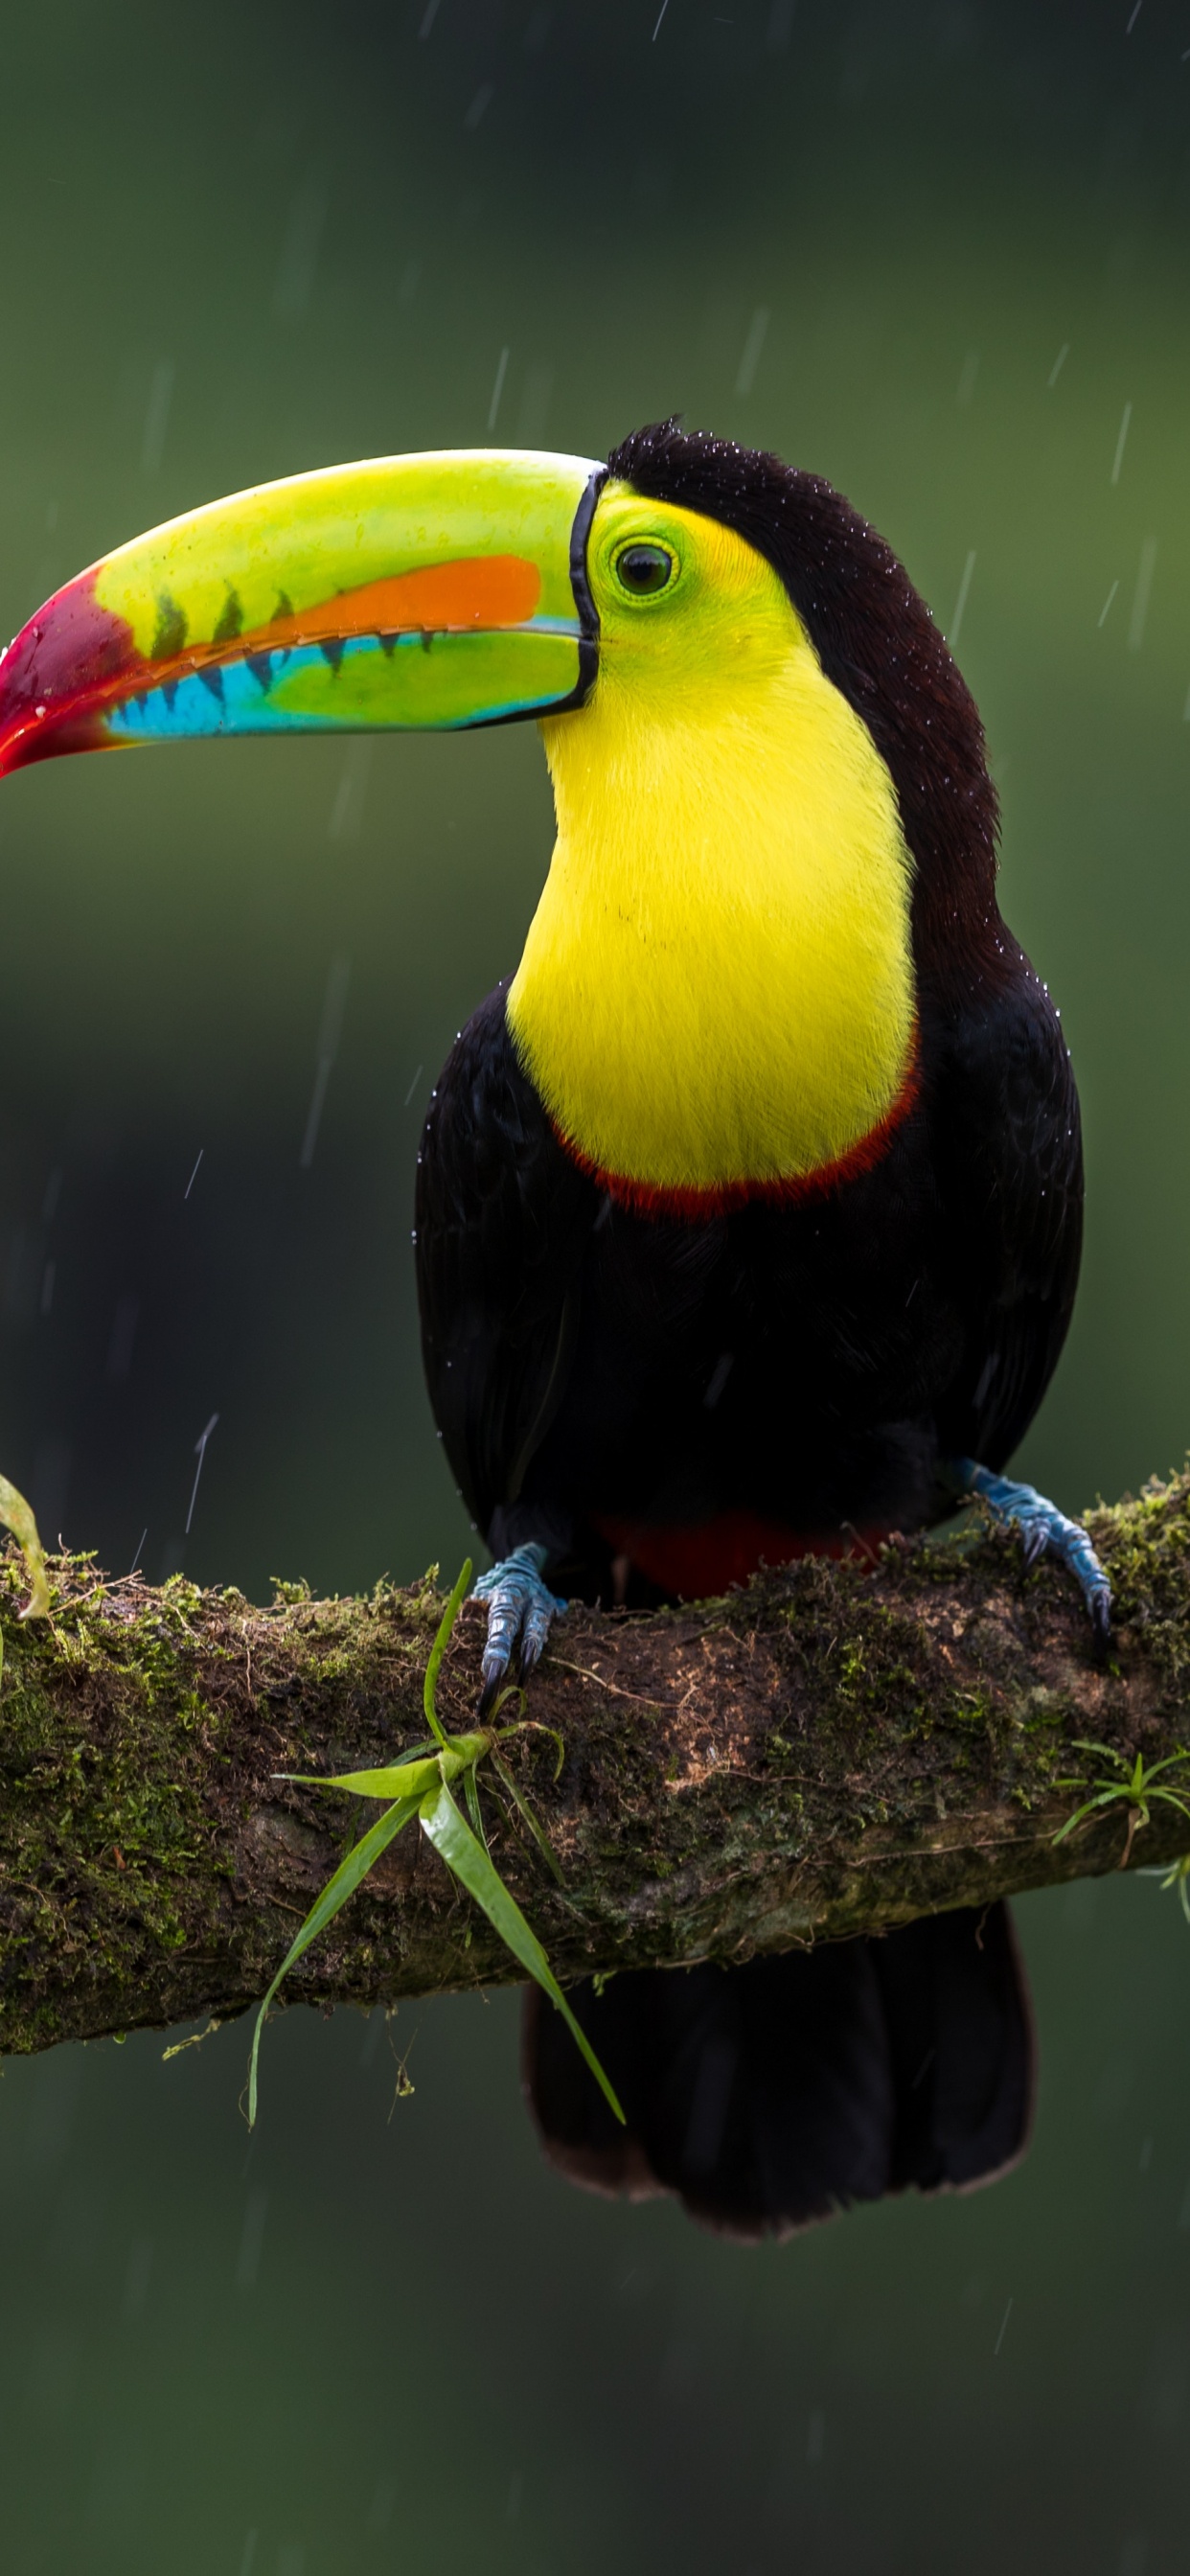 Black Yellow and Red Bird on Tree Branch. Wallpaper in 1242x2688 Resolution